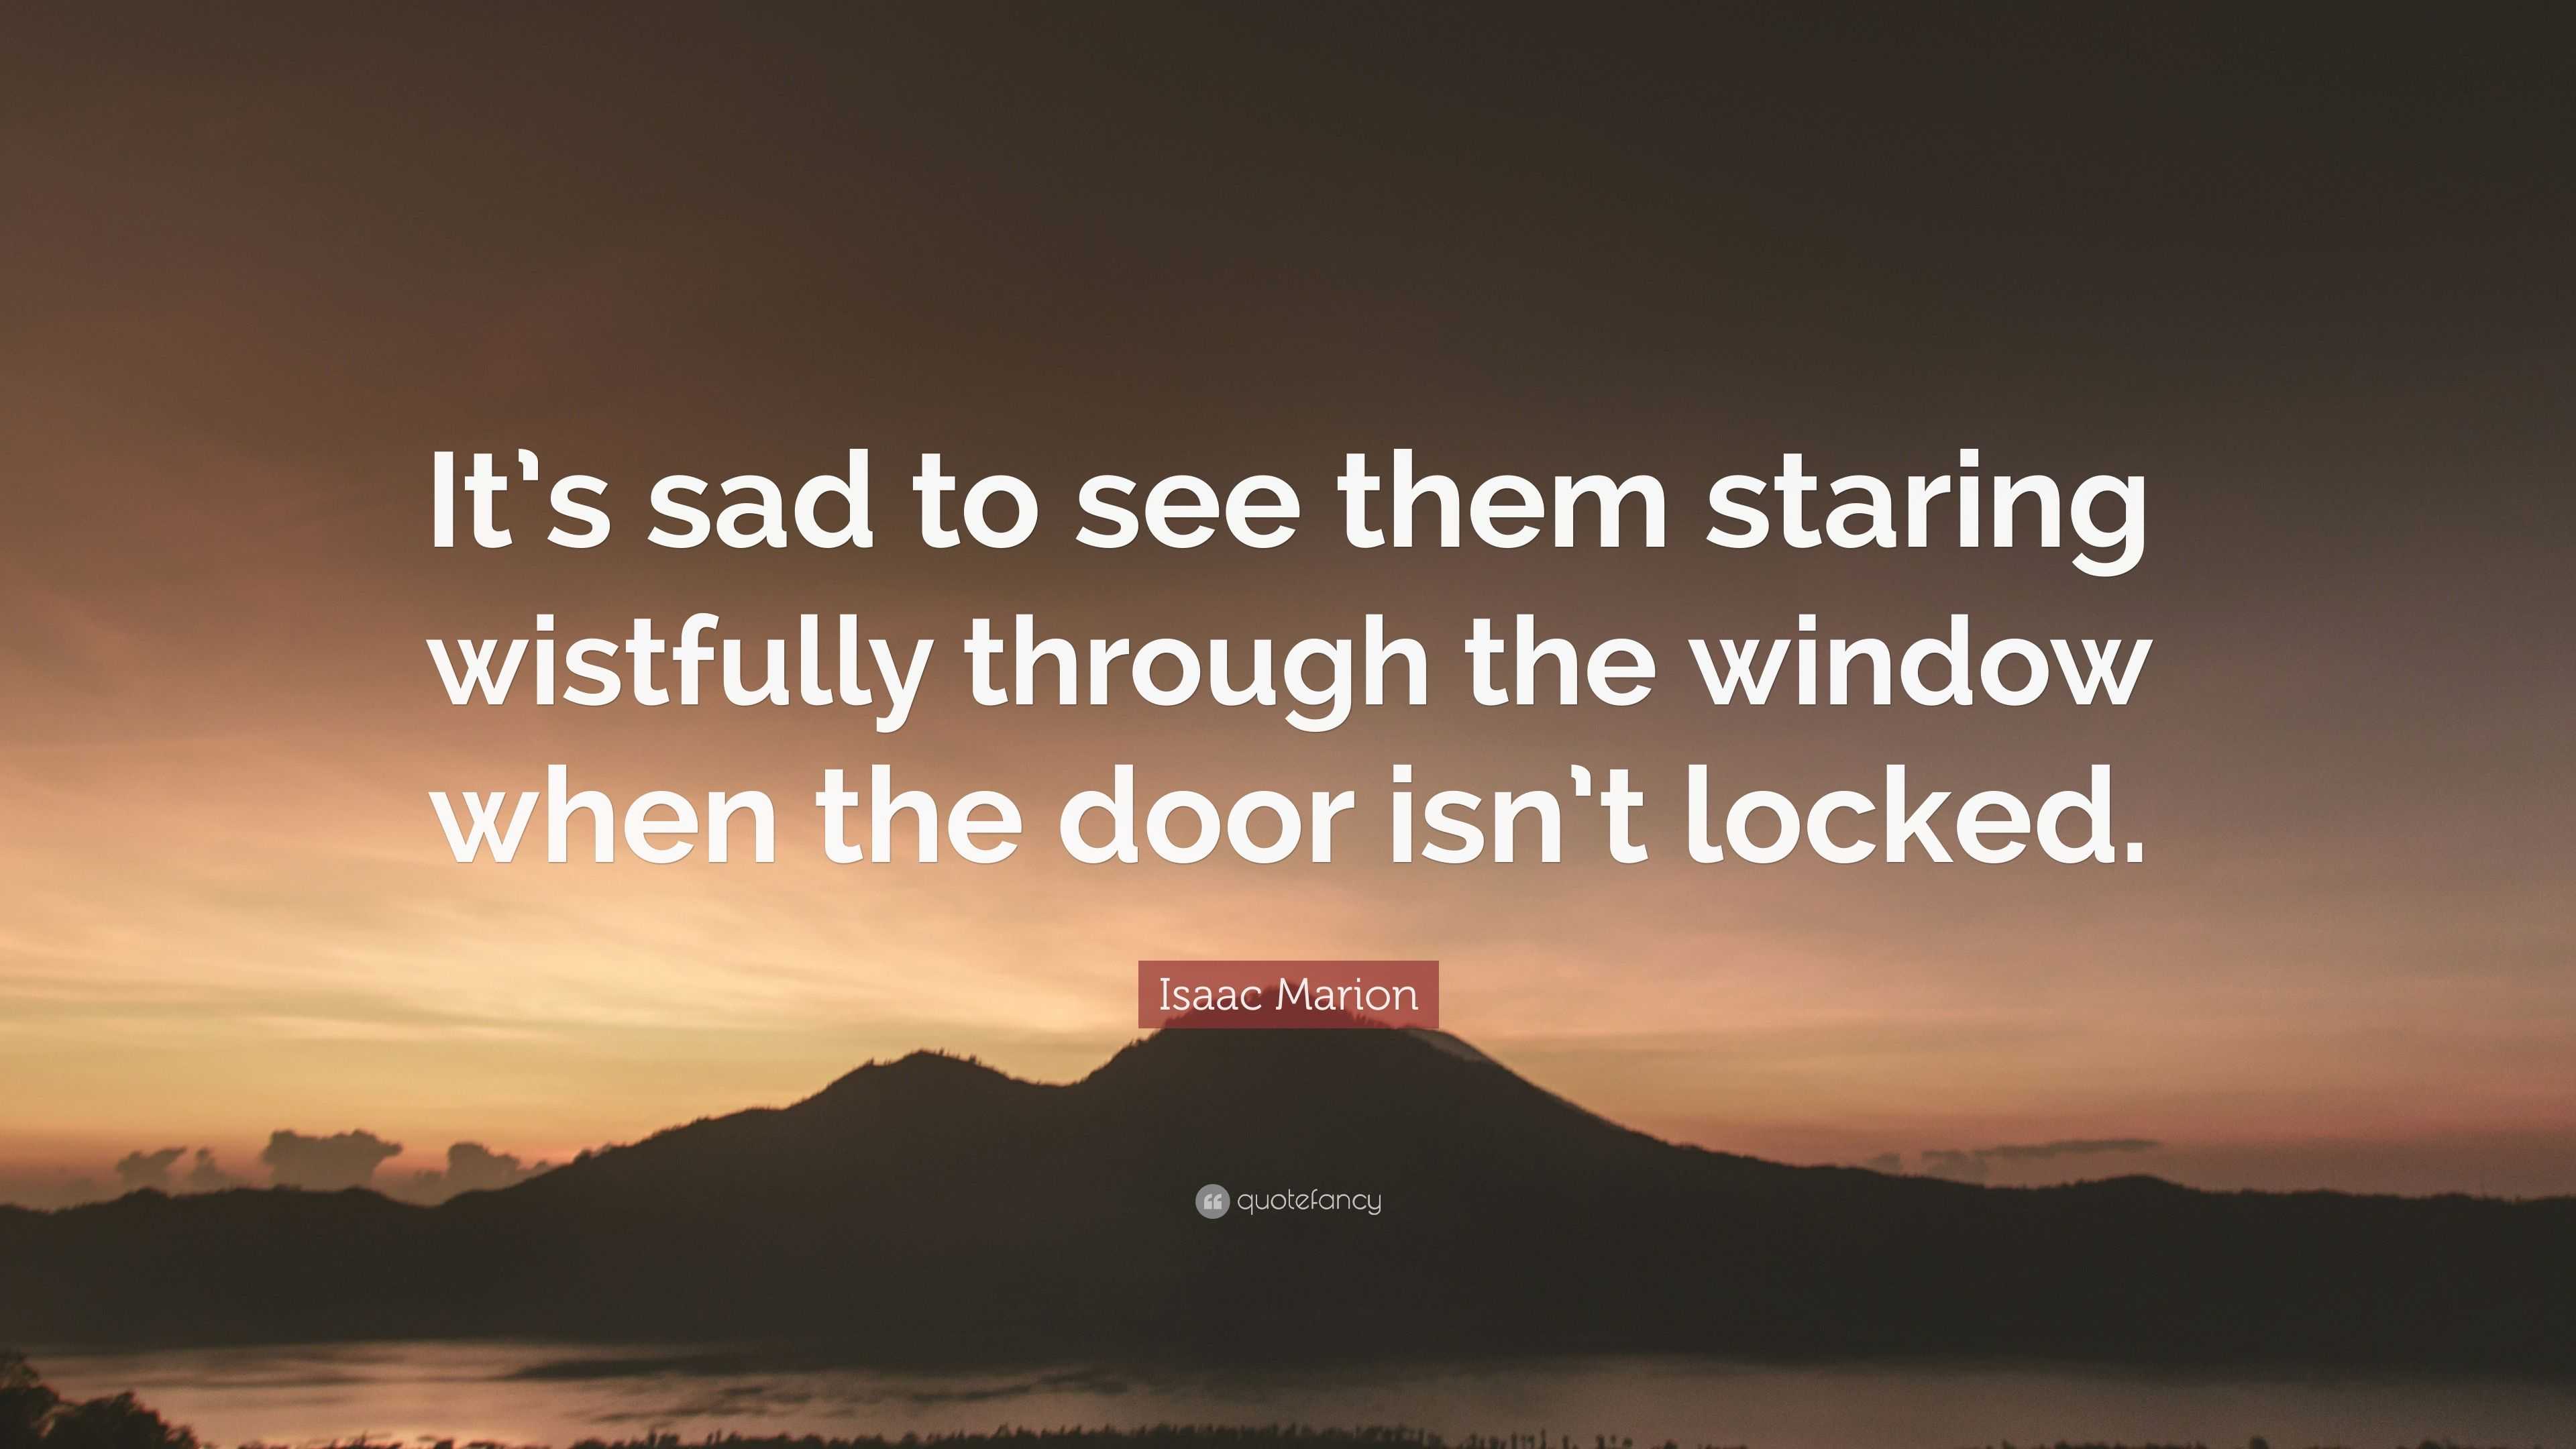 Isaac Marion Quote: “It’s sad to see them staring wistfully through the ...